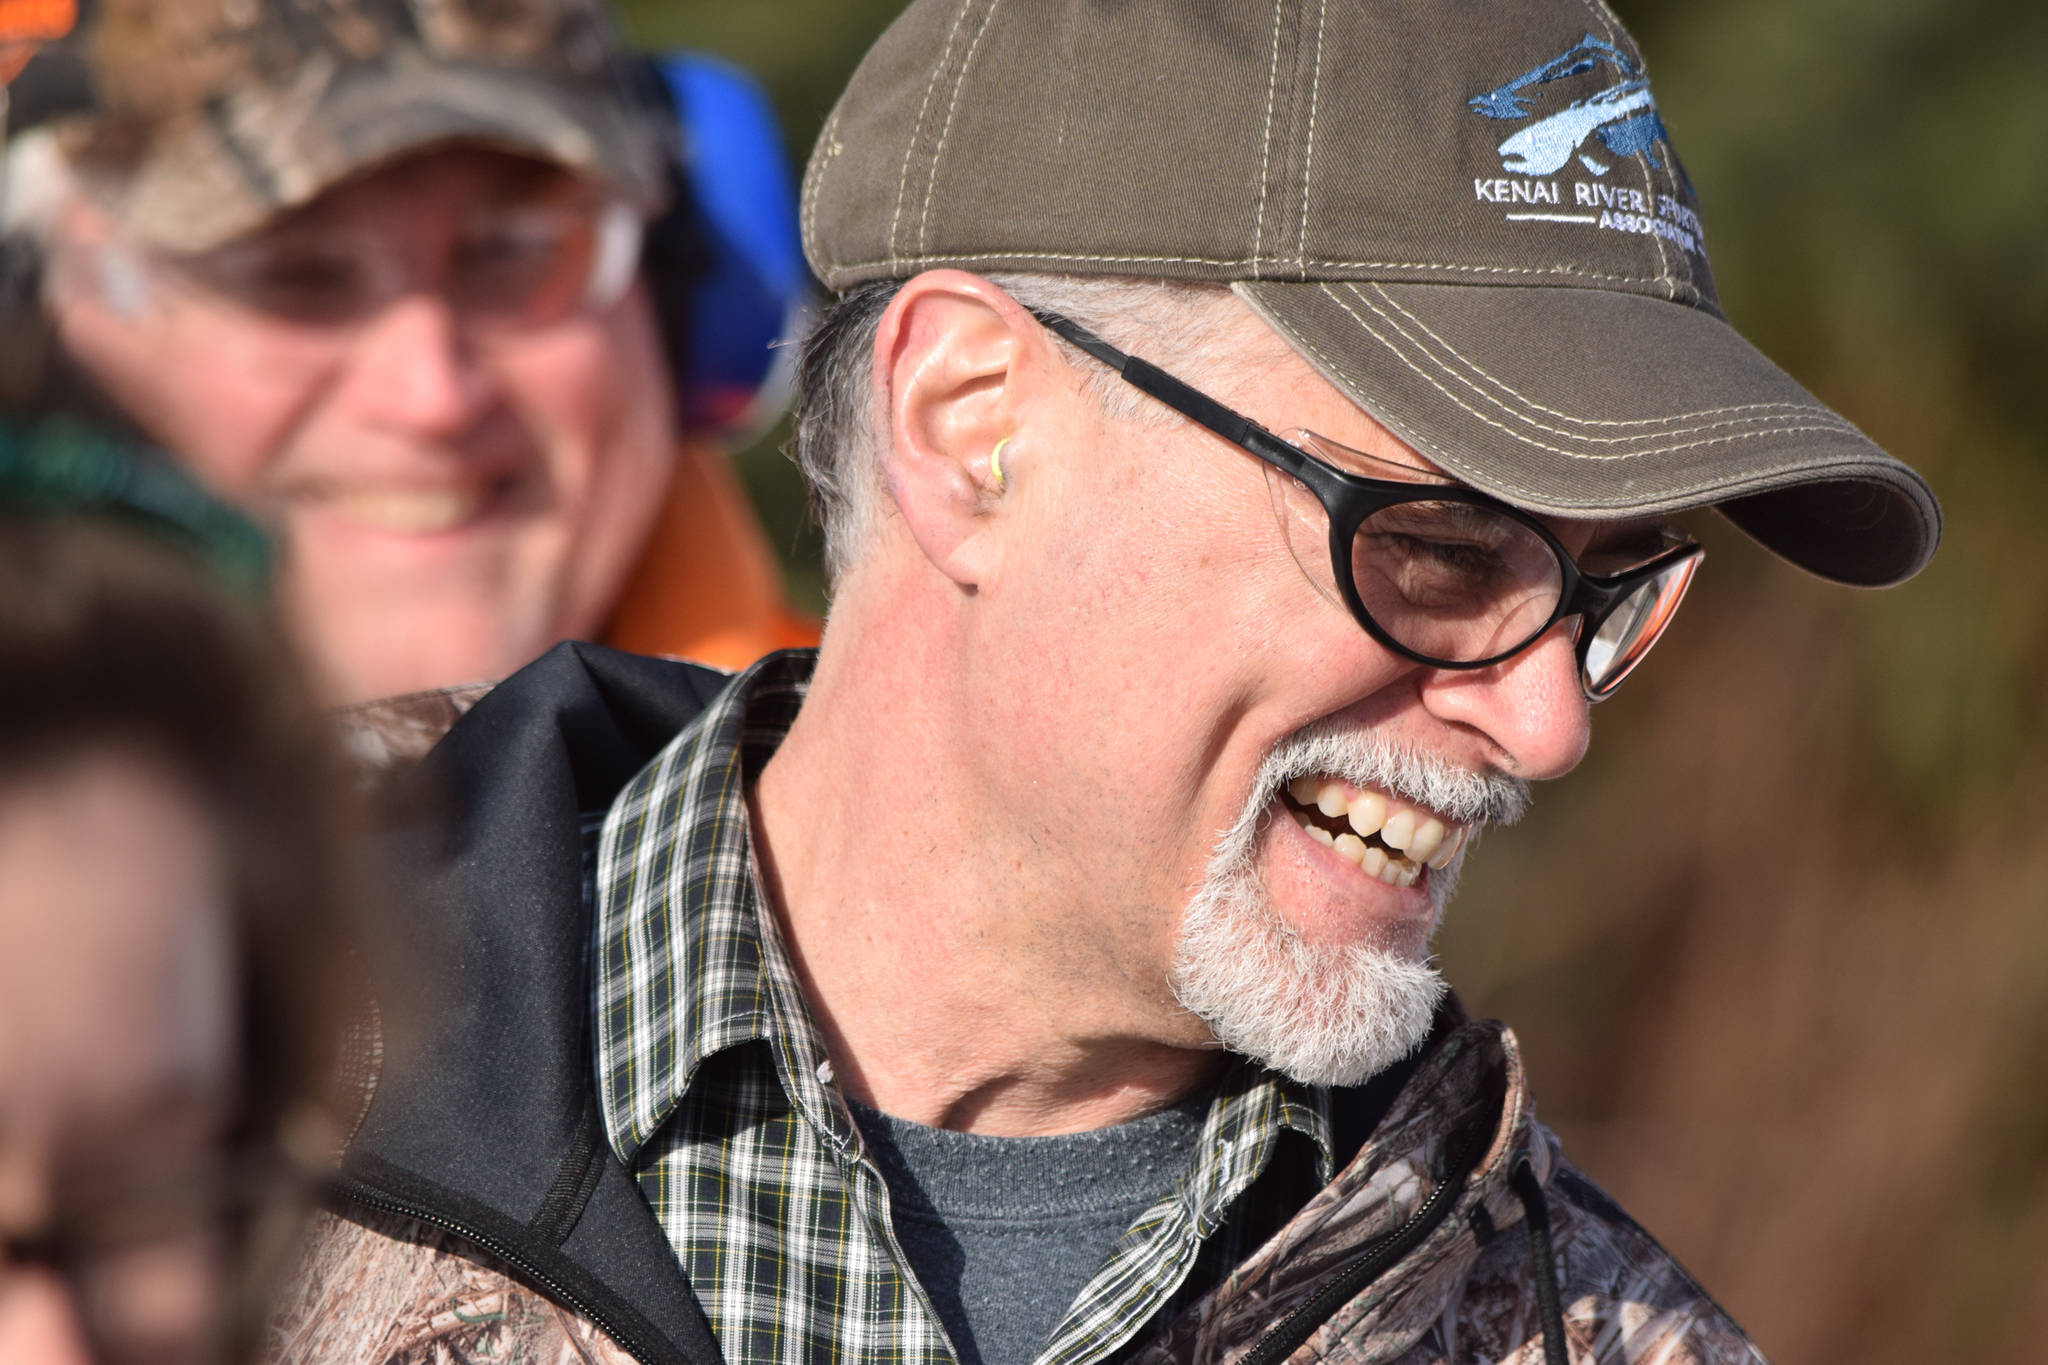 Sen. Peter Micciche, R-Soldotna, smiles after shooting in the rifle competition of the 21st annual Legislative Shoot on Saturday, March 17, 2018 at the Juneau Gun Club. Micciche’s team, Majority Arms, took first place overall. (James Brooks | Juneau Empire)